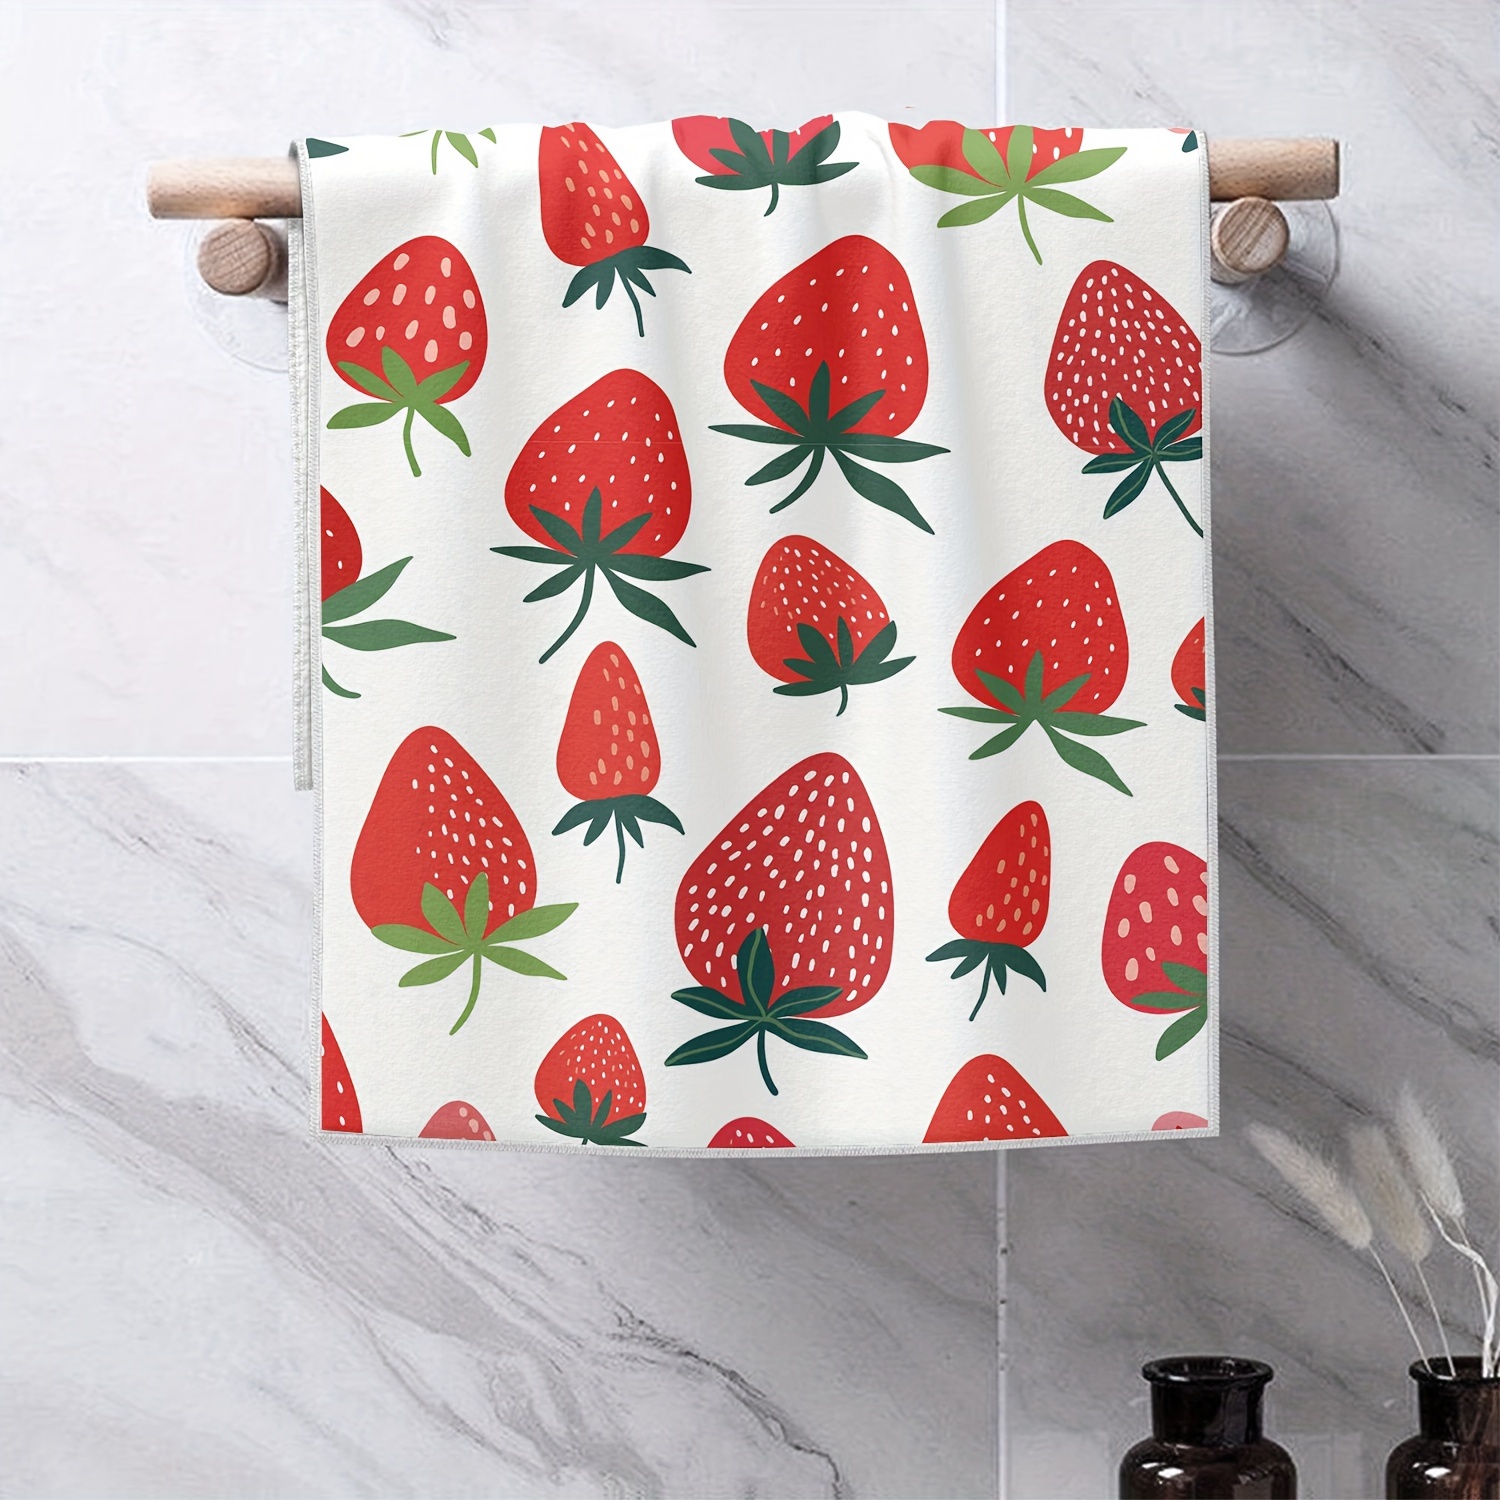 

Strawberry Themed Microfiber Kitchen Towels, Set Of 2, Contemporary Style, Machine Washable, Oblong Knit Fabric Dish Cloths, Ultra Fine Quick-dry Cleaning Towels, Fruit Pattern Decoration